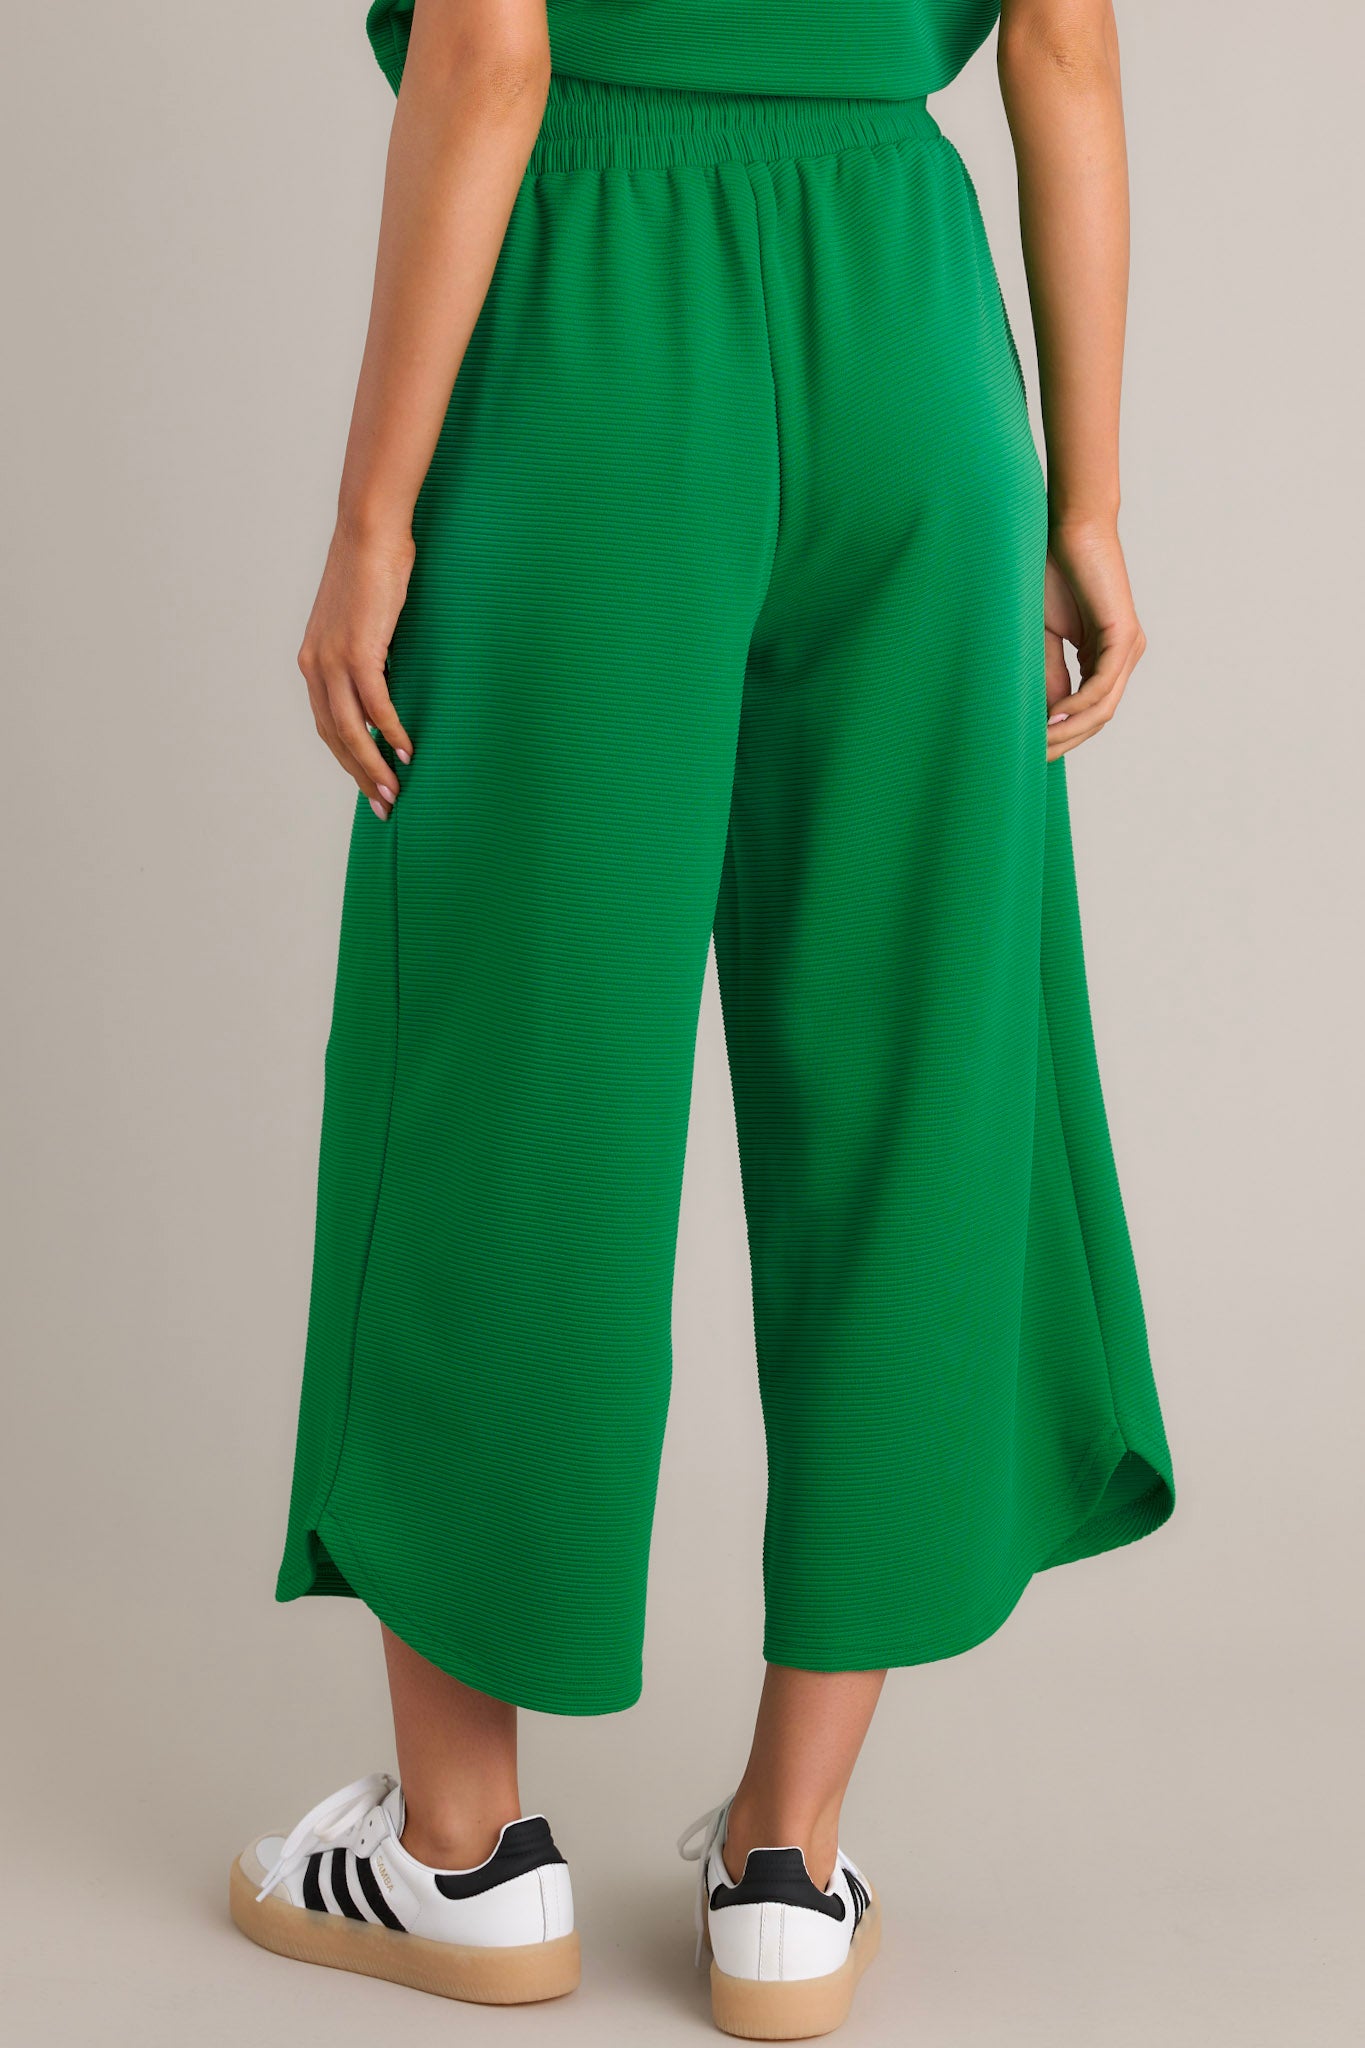 Back view of green pants highlighting the high waisted design, elastic waistband, ribbed texture, wide leg, and scooped hemline.